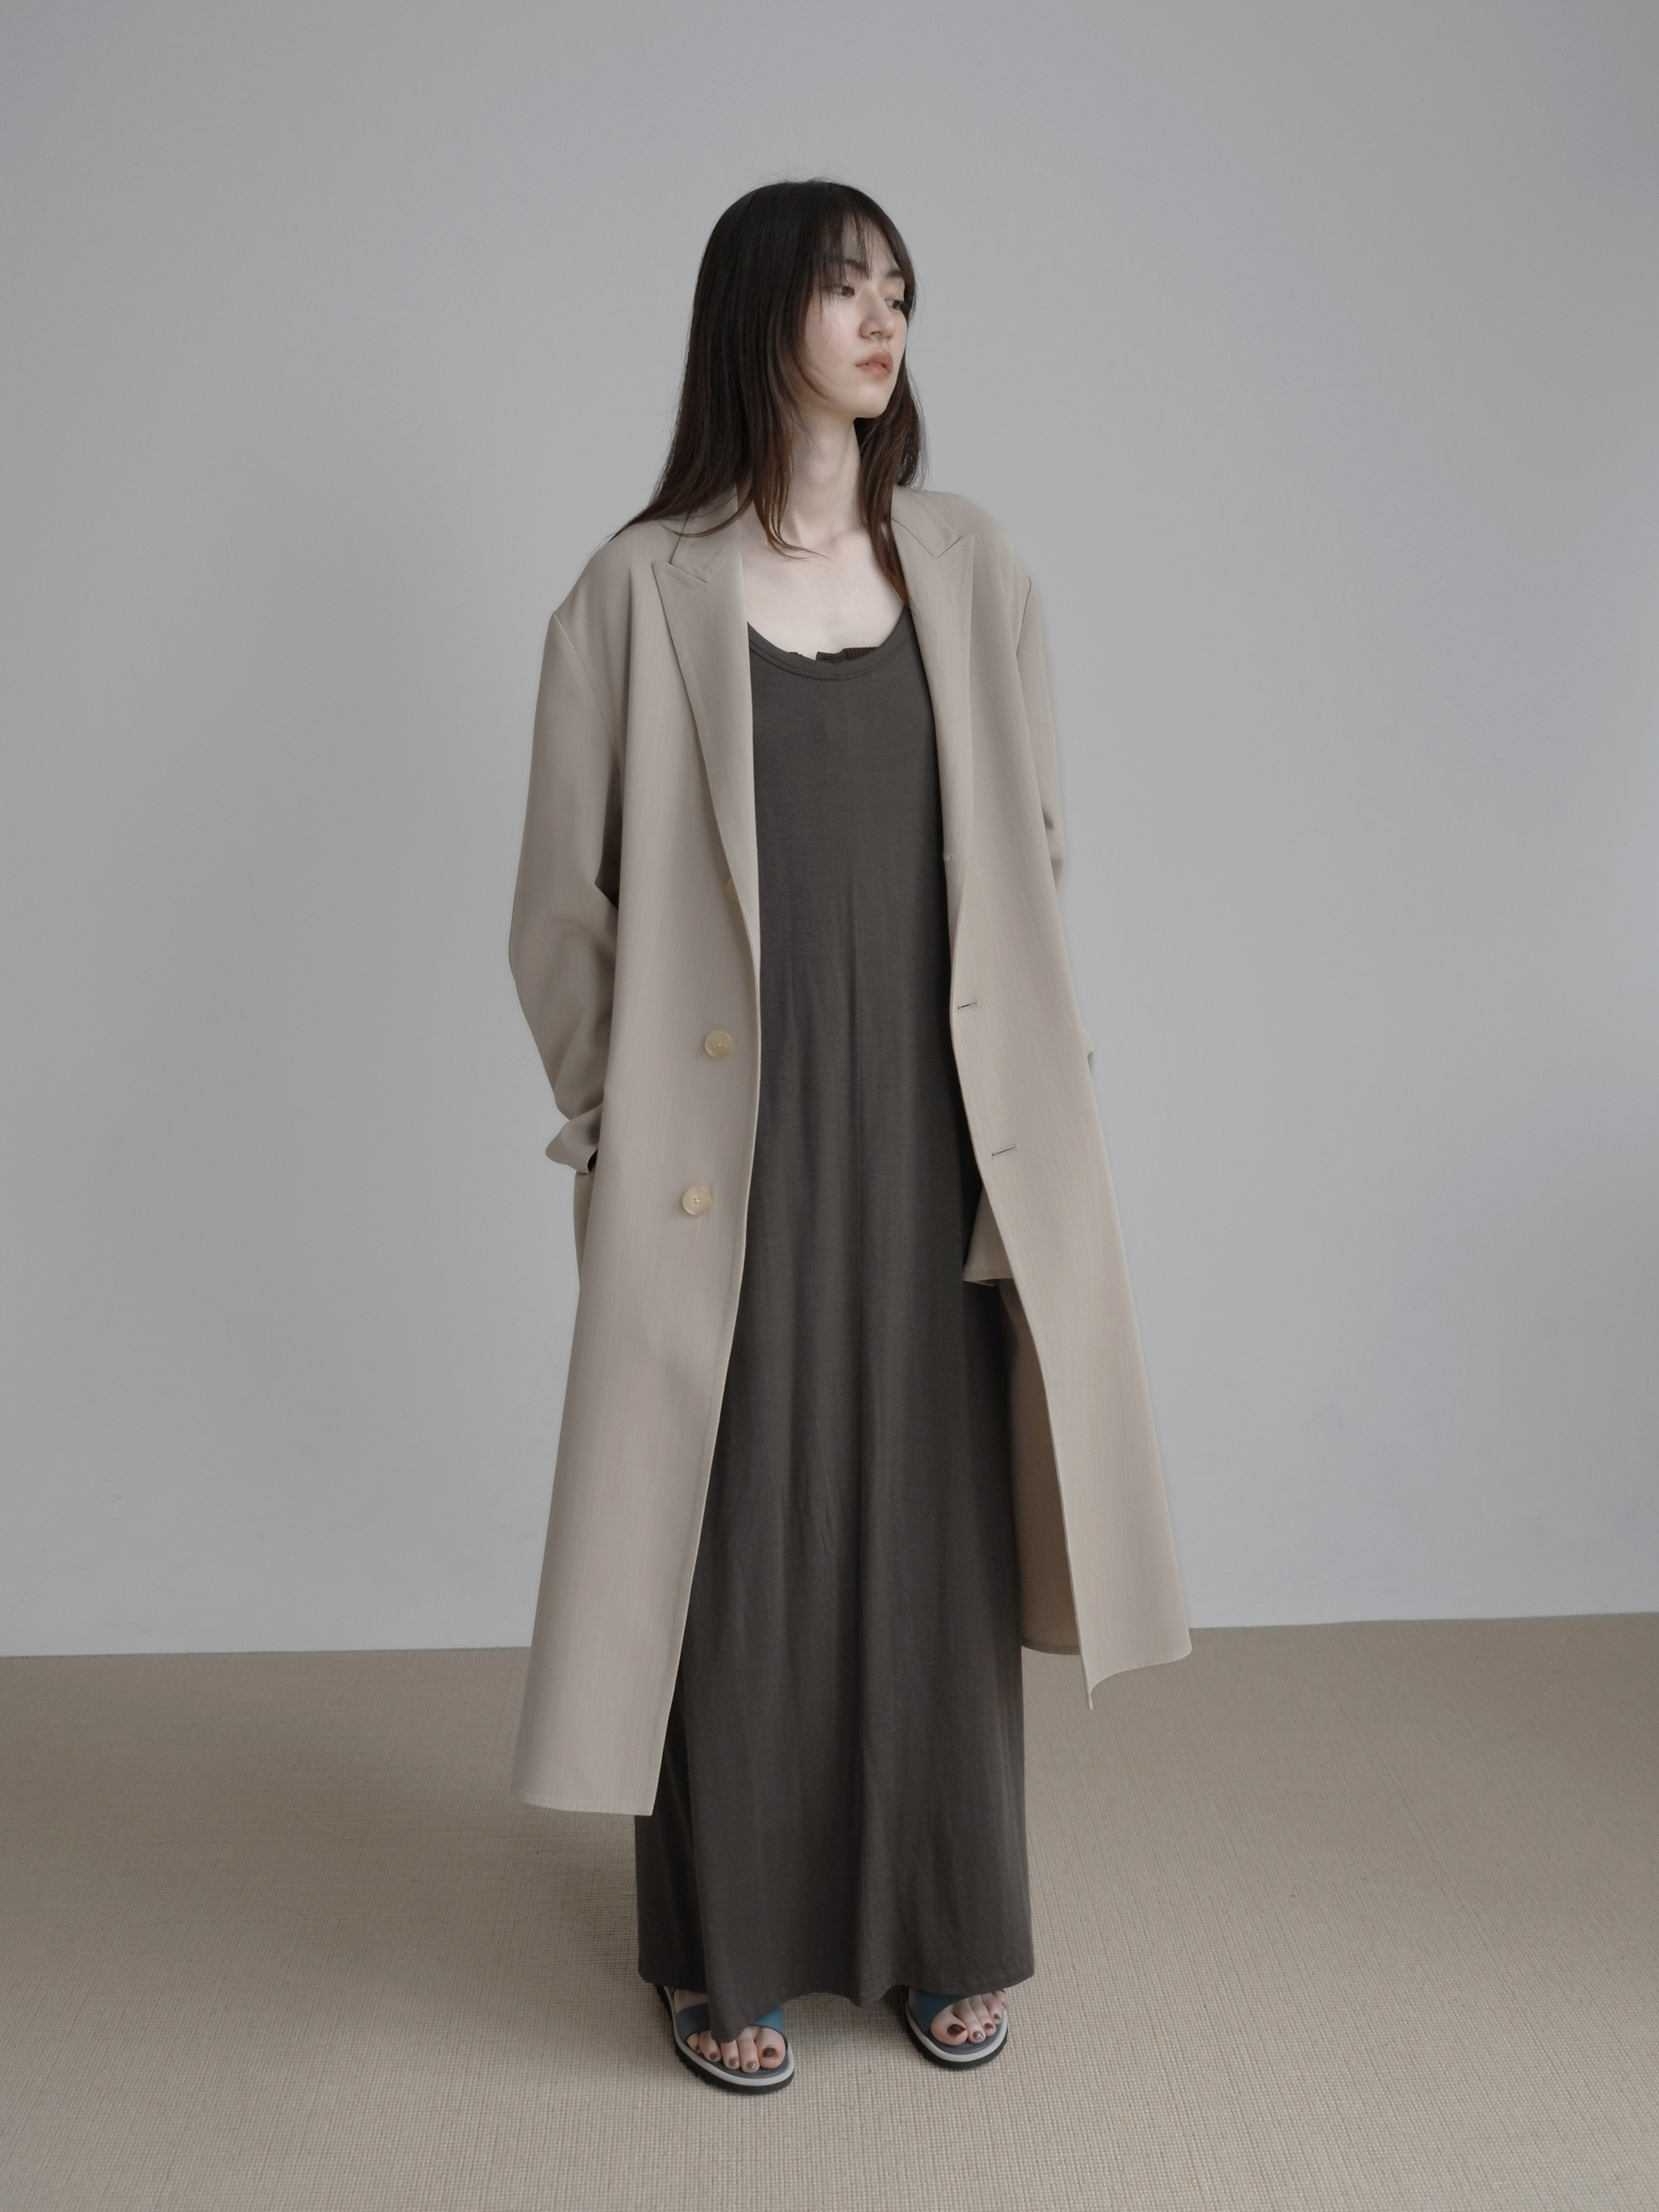 AURALEE】 WOOL DOUBLE CLOTH HANDSEWNCOAT - ロングコート